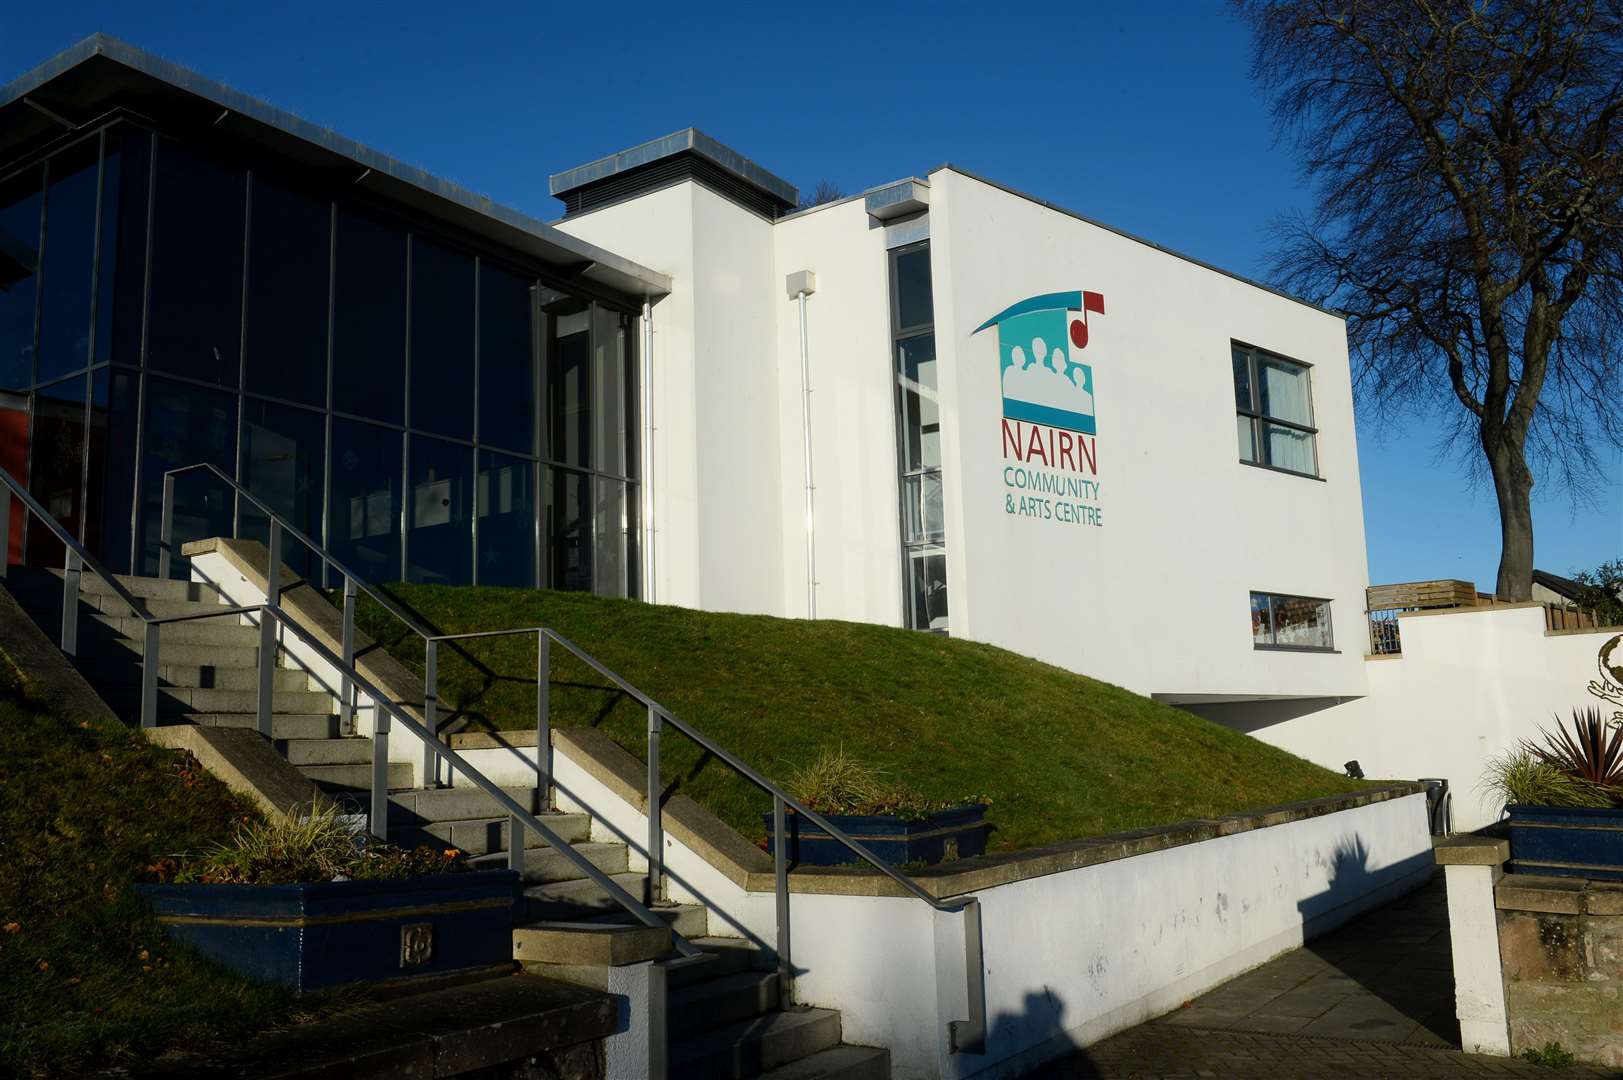 Nairn Community and Arts Centre.